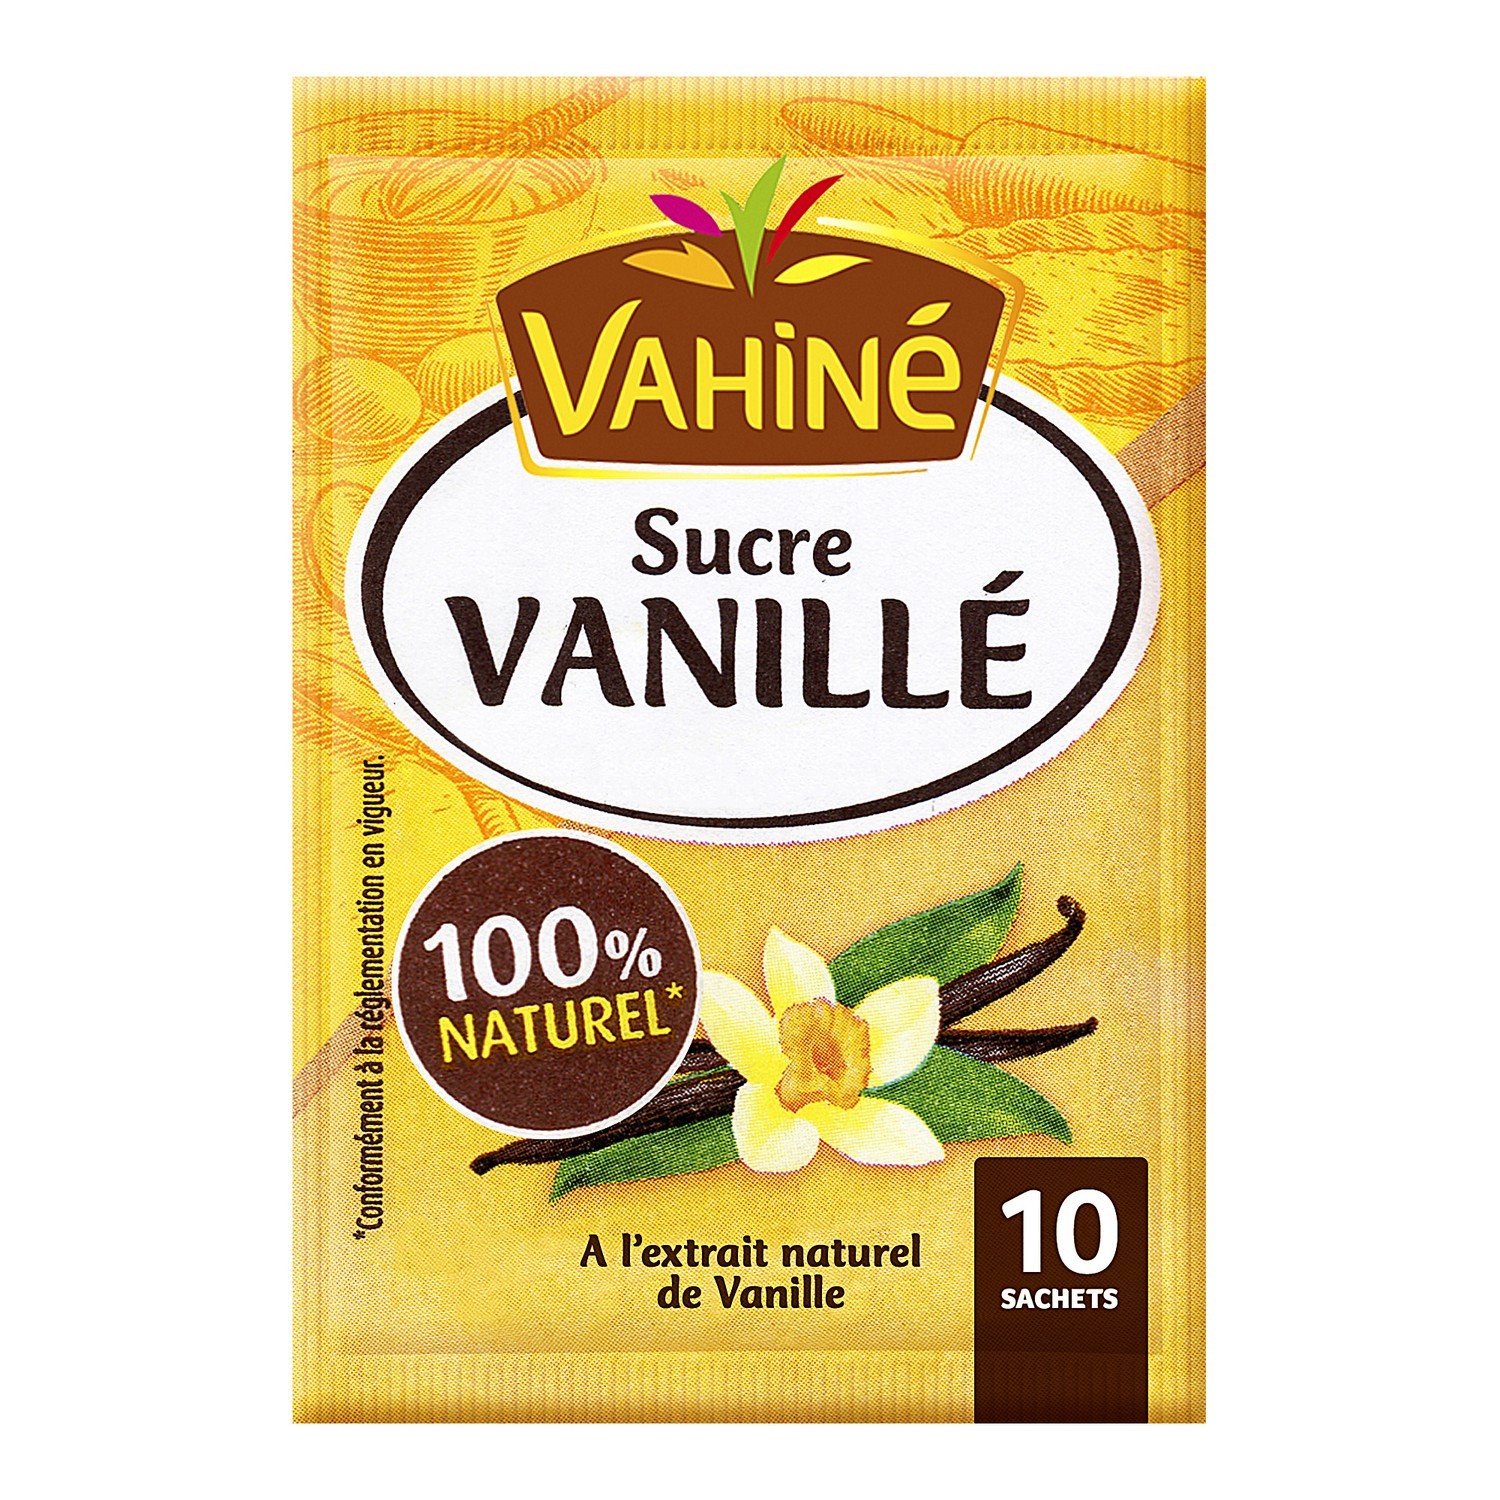 https://my-french-grocery.com/wp-content/uploads/2019/03/SUCRE-VANILLE.jpg